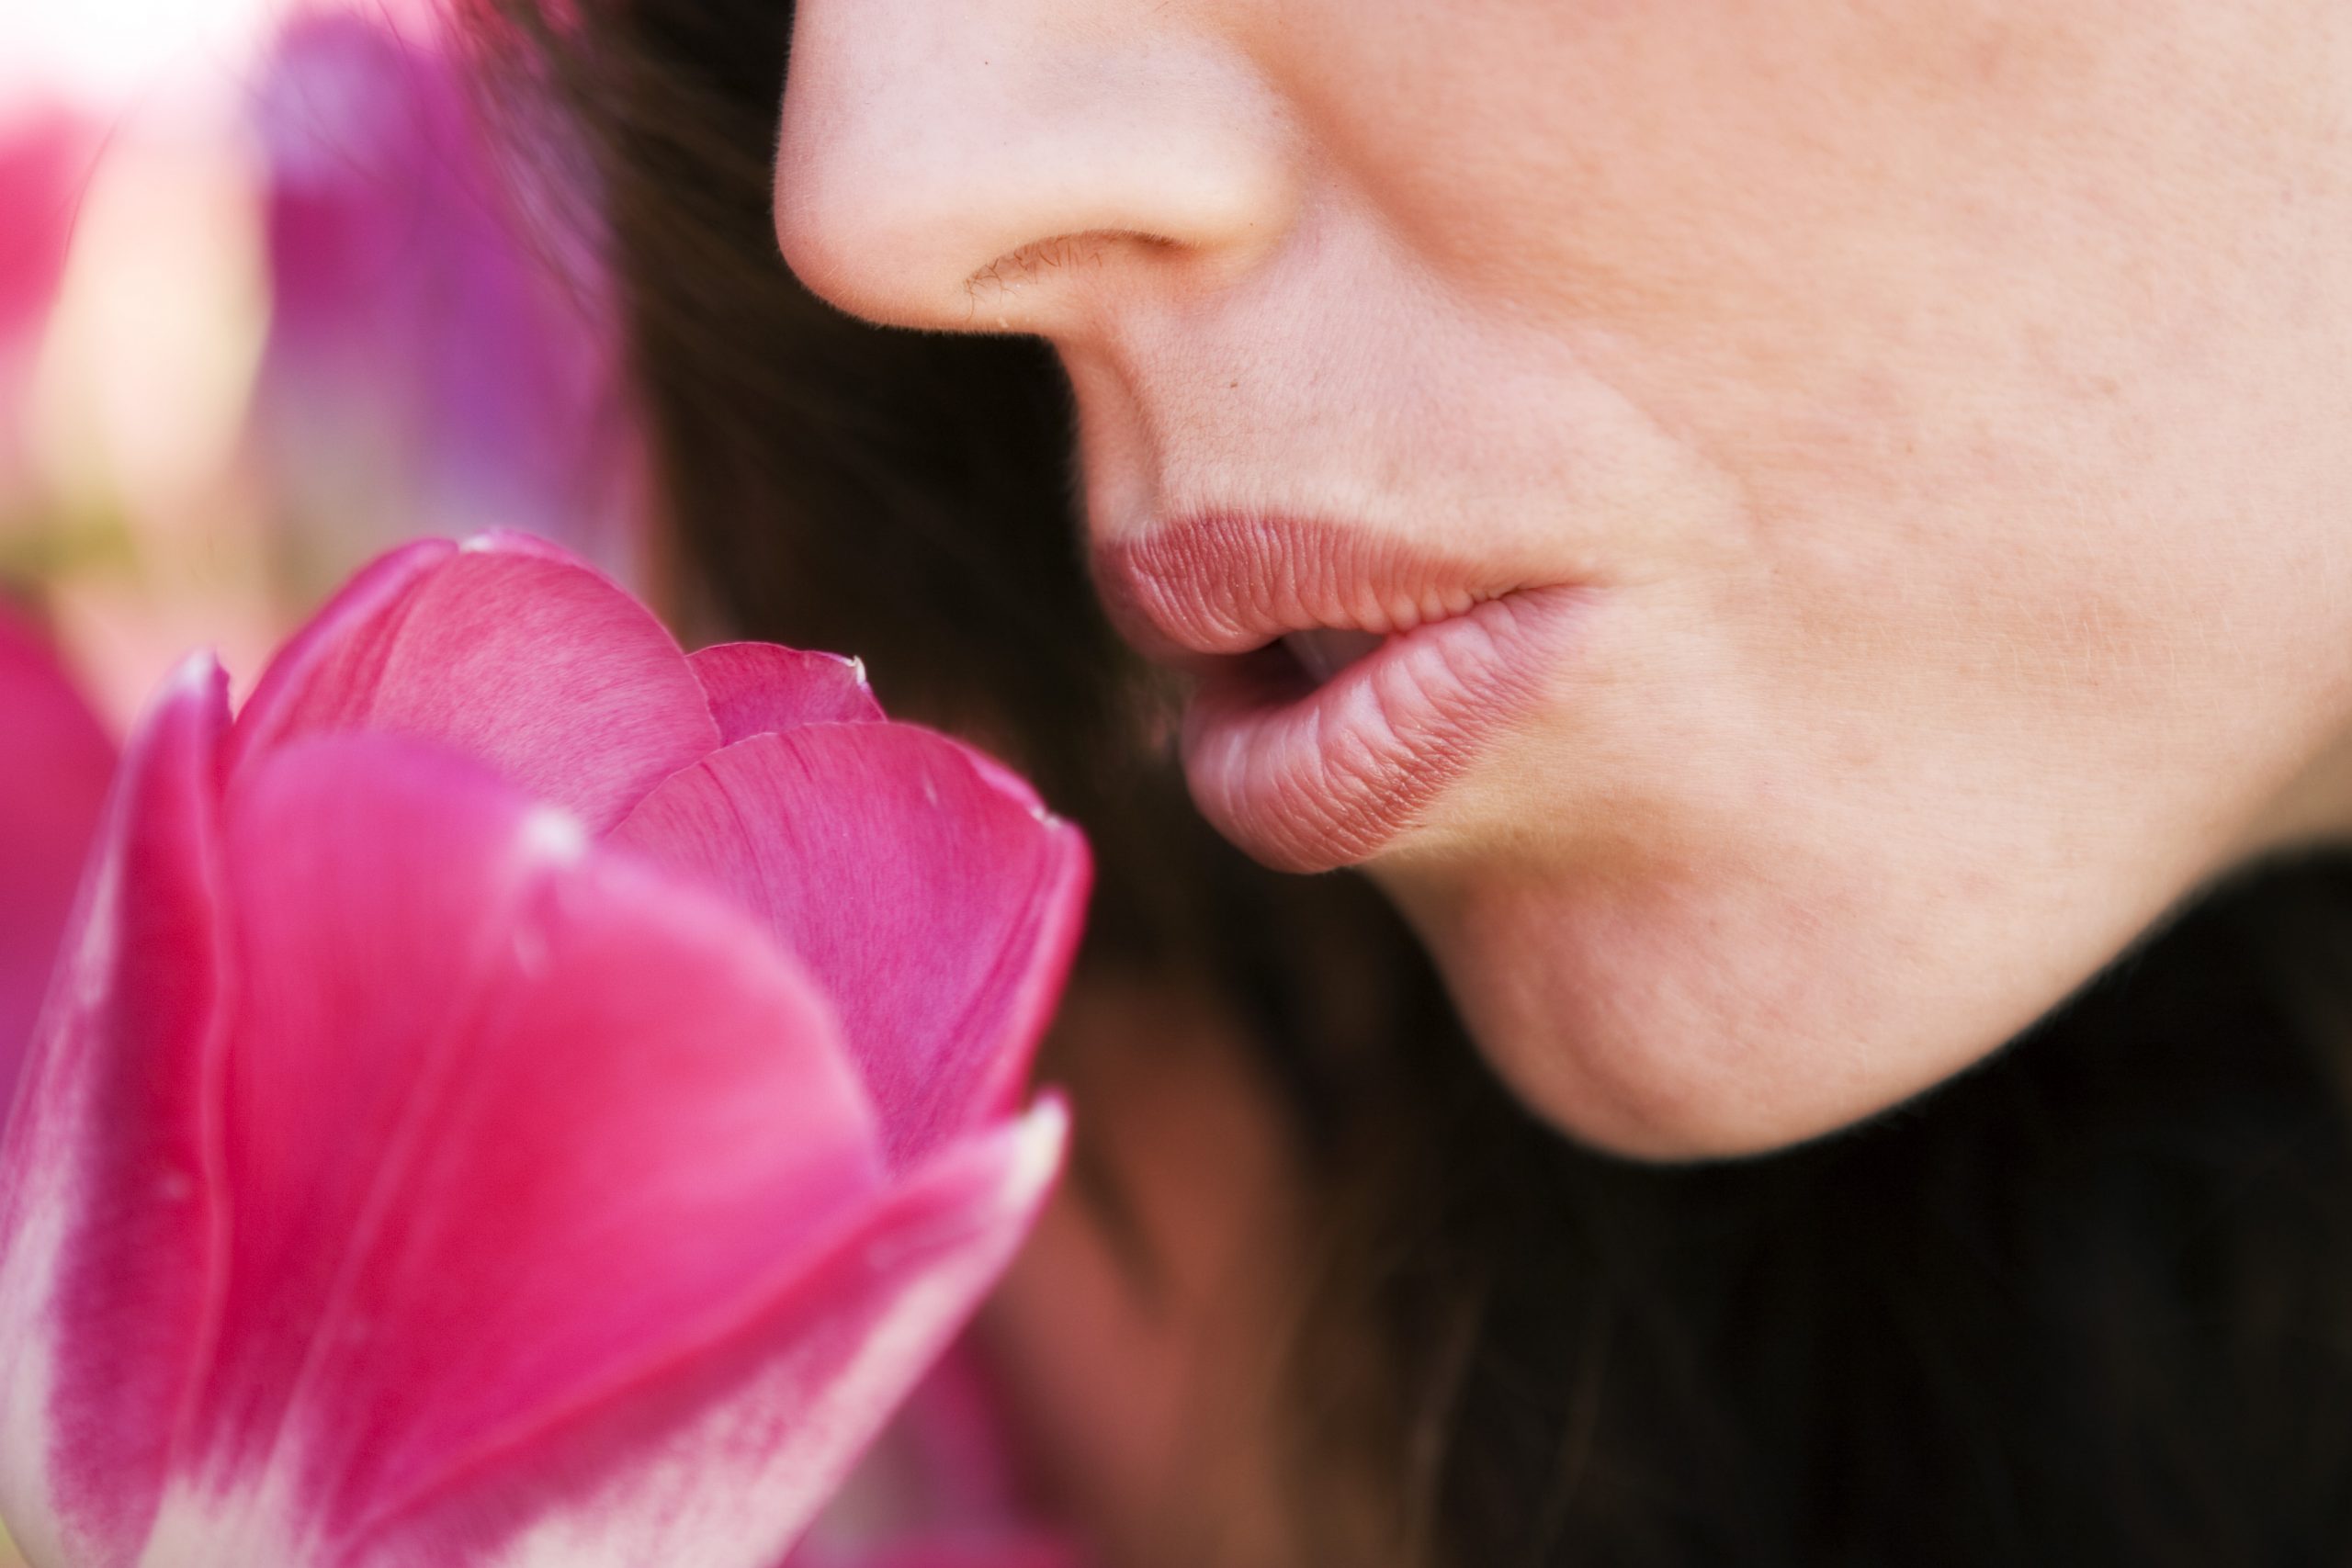 A woman is smelling a pink flower, promoting optimal health.